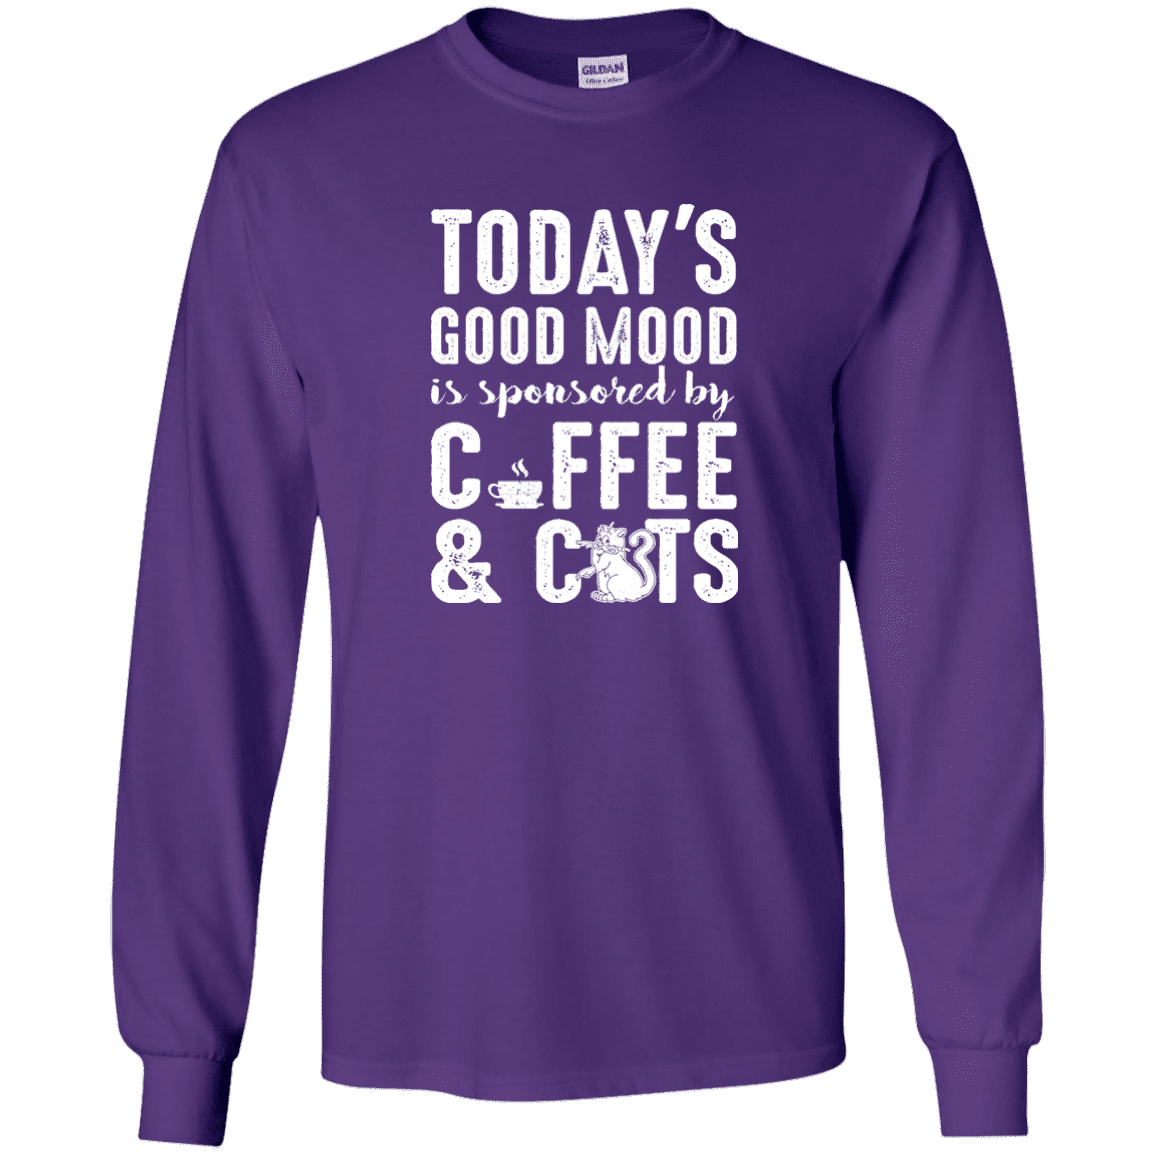 Today's Good Mood Coffee & Cats - Long Sleeve T Shirt.